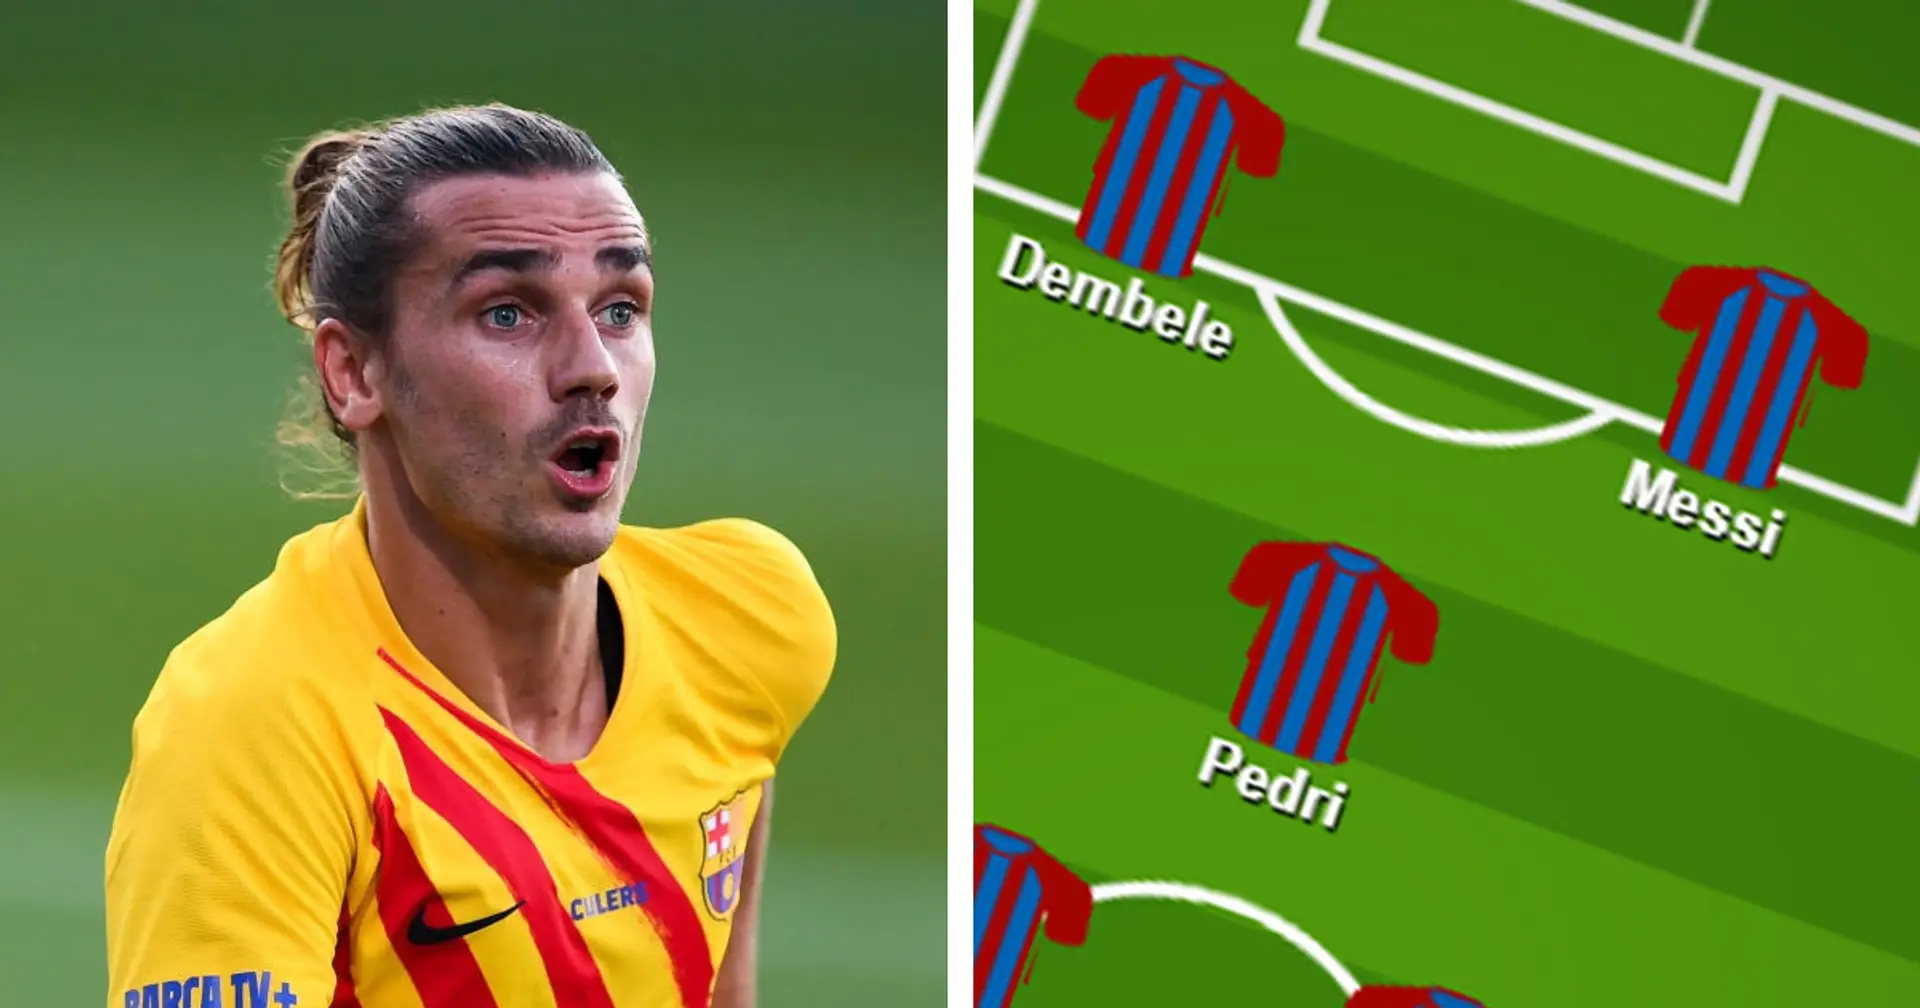 Griezmann out, Araujo in: Barca's potential XI for Clasico based on Valladolid win